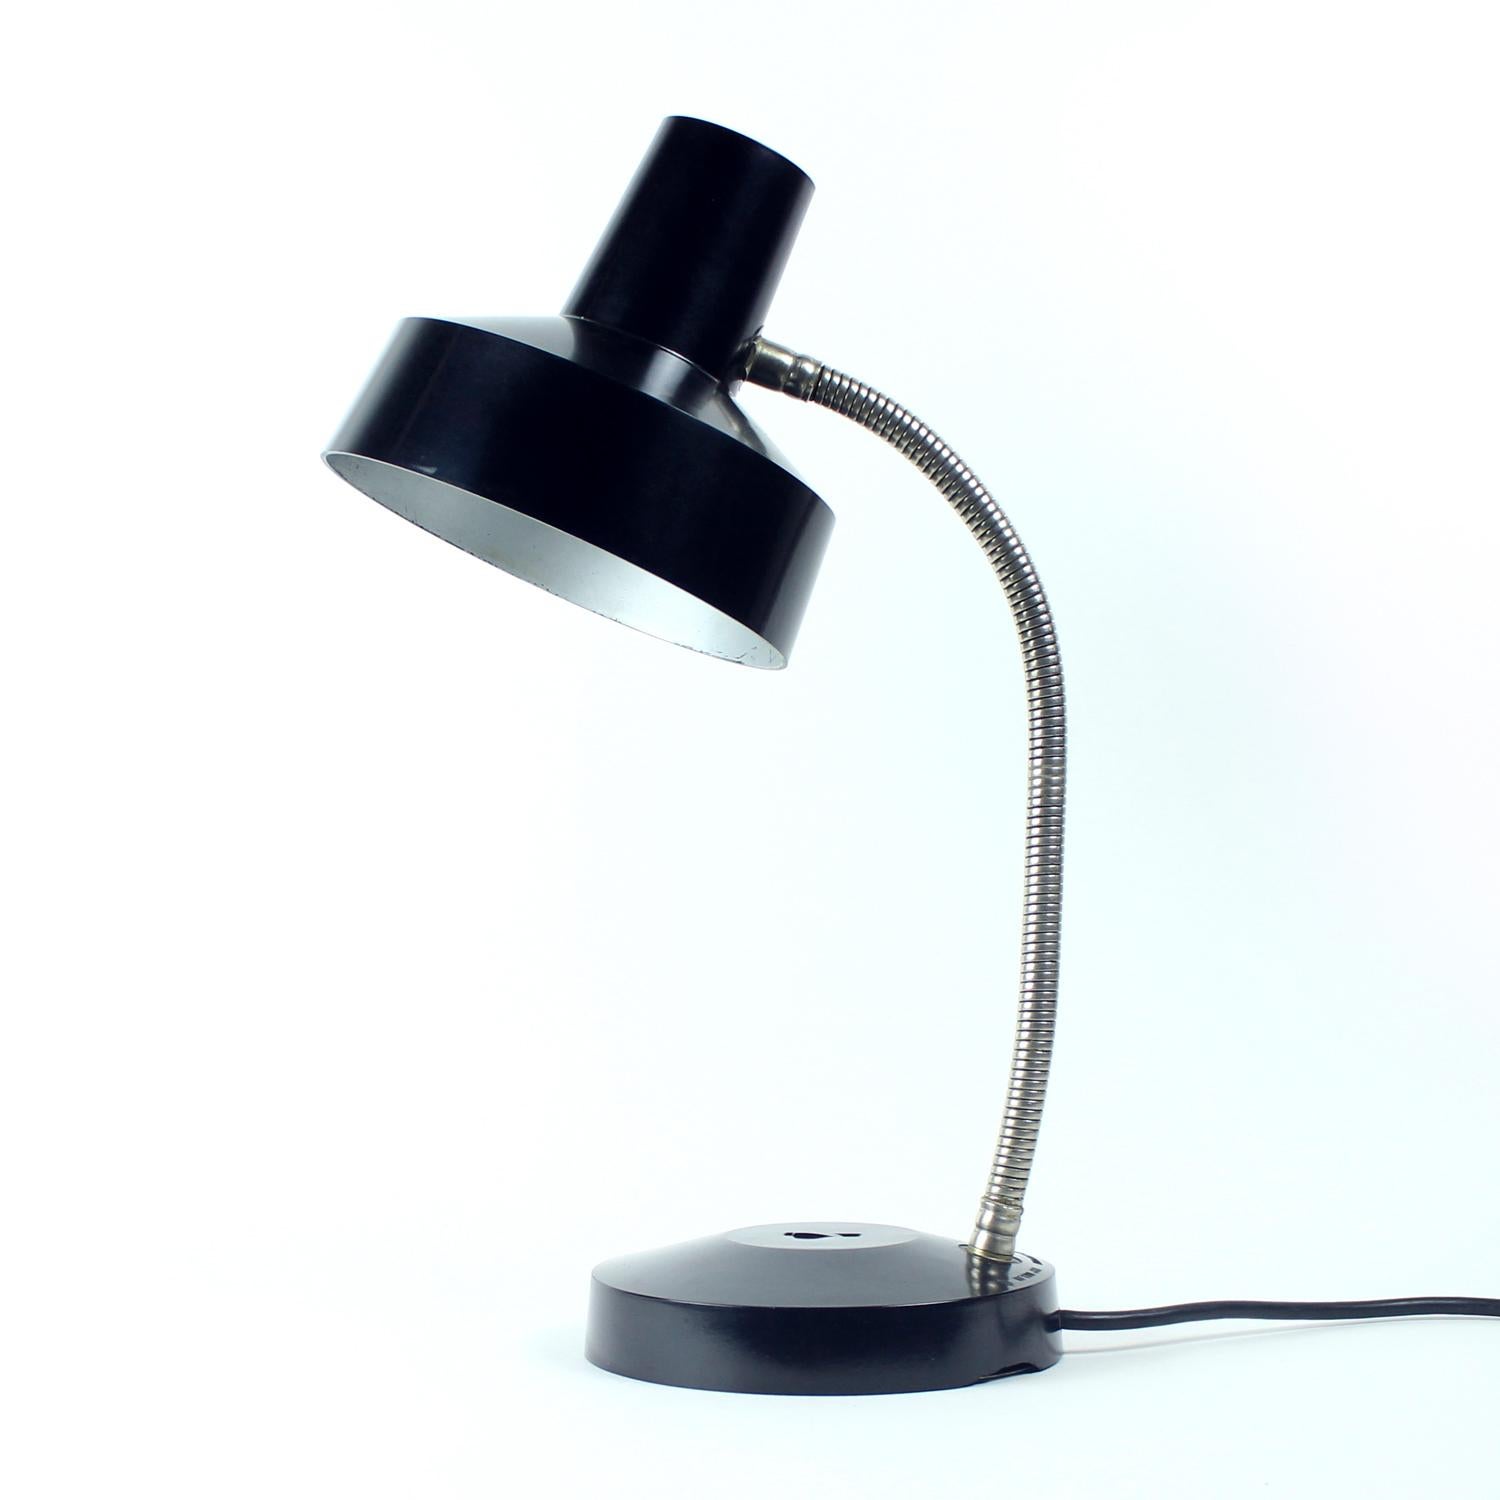 Great industrial table lamp. Produced in Czechoslovakia by Elektrosvit company as Type 1013.01 lamp. Originally the lamps were used at Police stations of the Communist Czechoslovakia. The lamp is made in black bakelite shield and base. The shield is